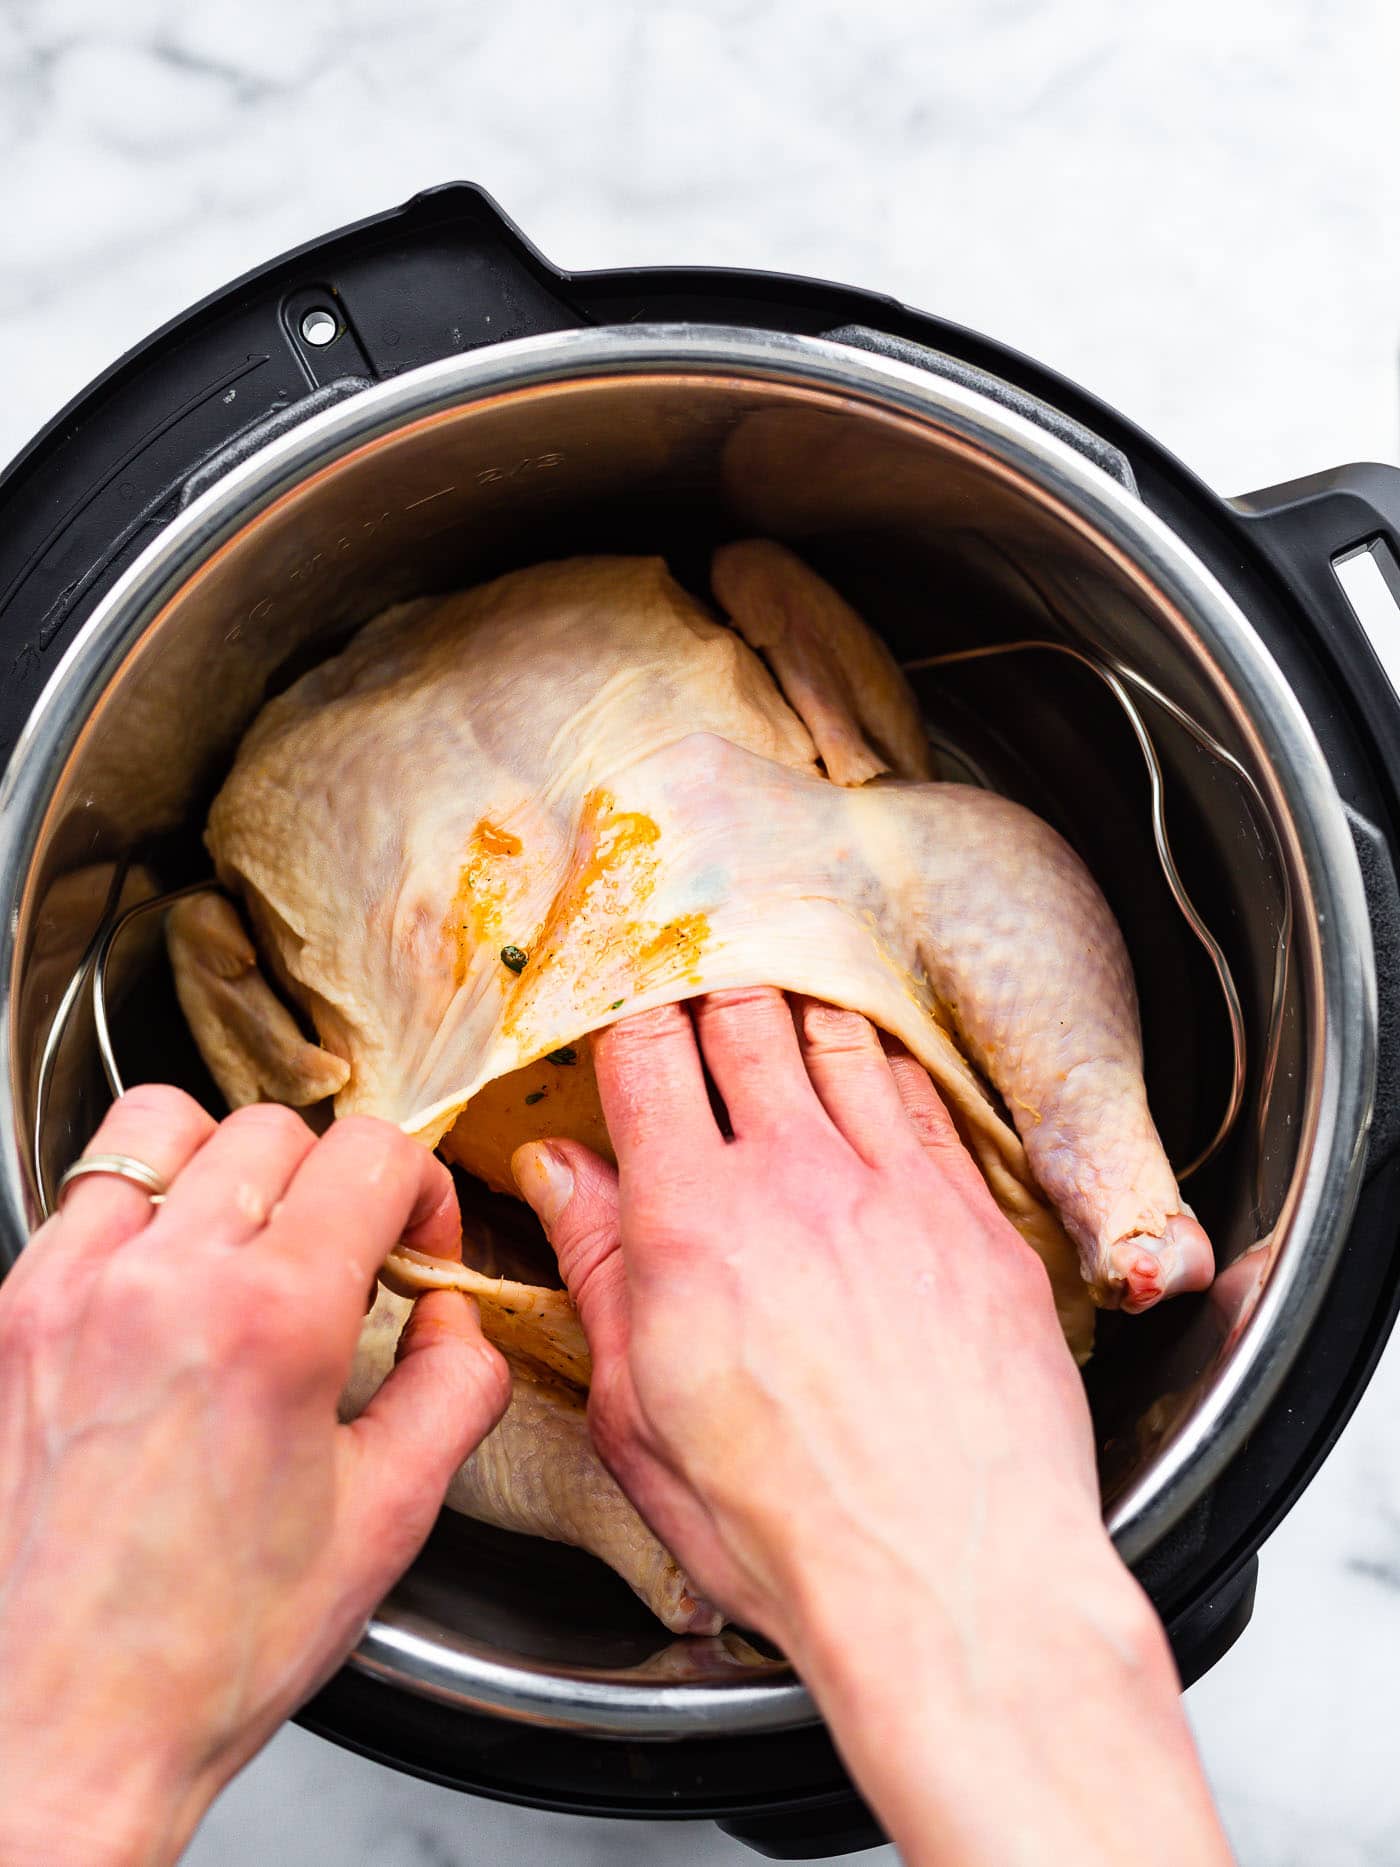 a whole chicken in an instant pot with a woman's hands pulling the skin from the meat and spreading a marinade onto the meat by the legs